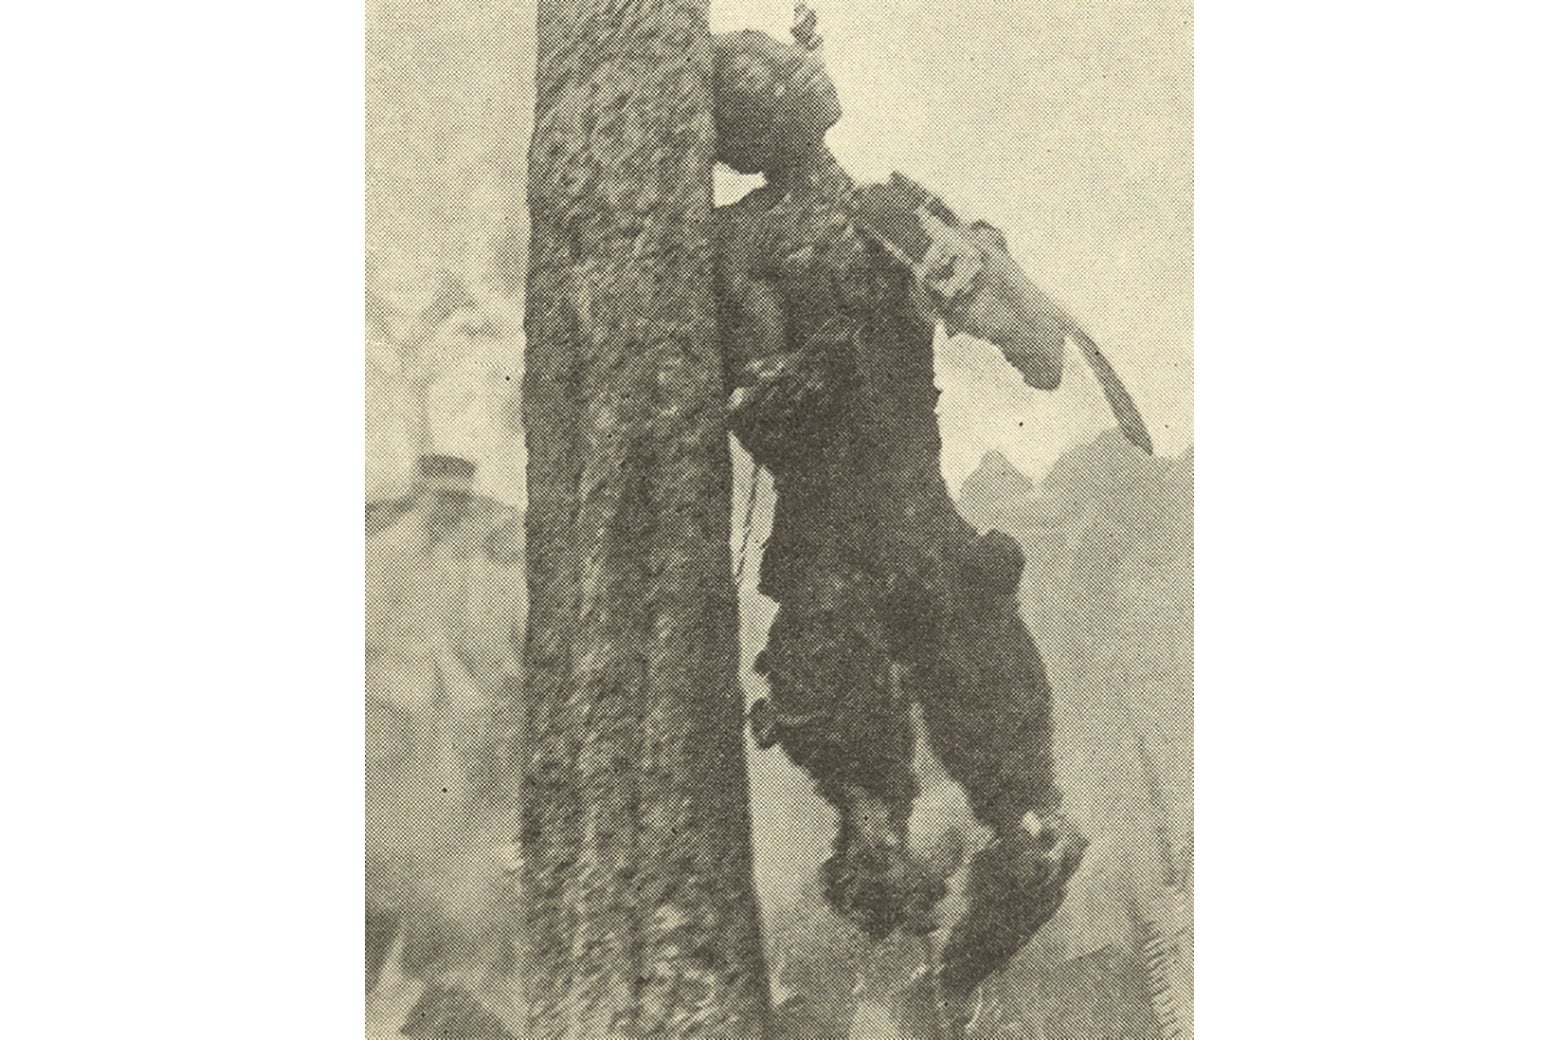 The almost unrecognizable body of Jesse Washington, hanging from a tree.